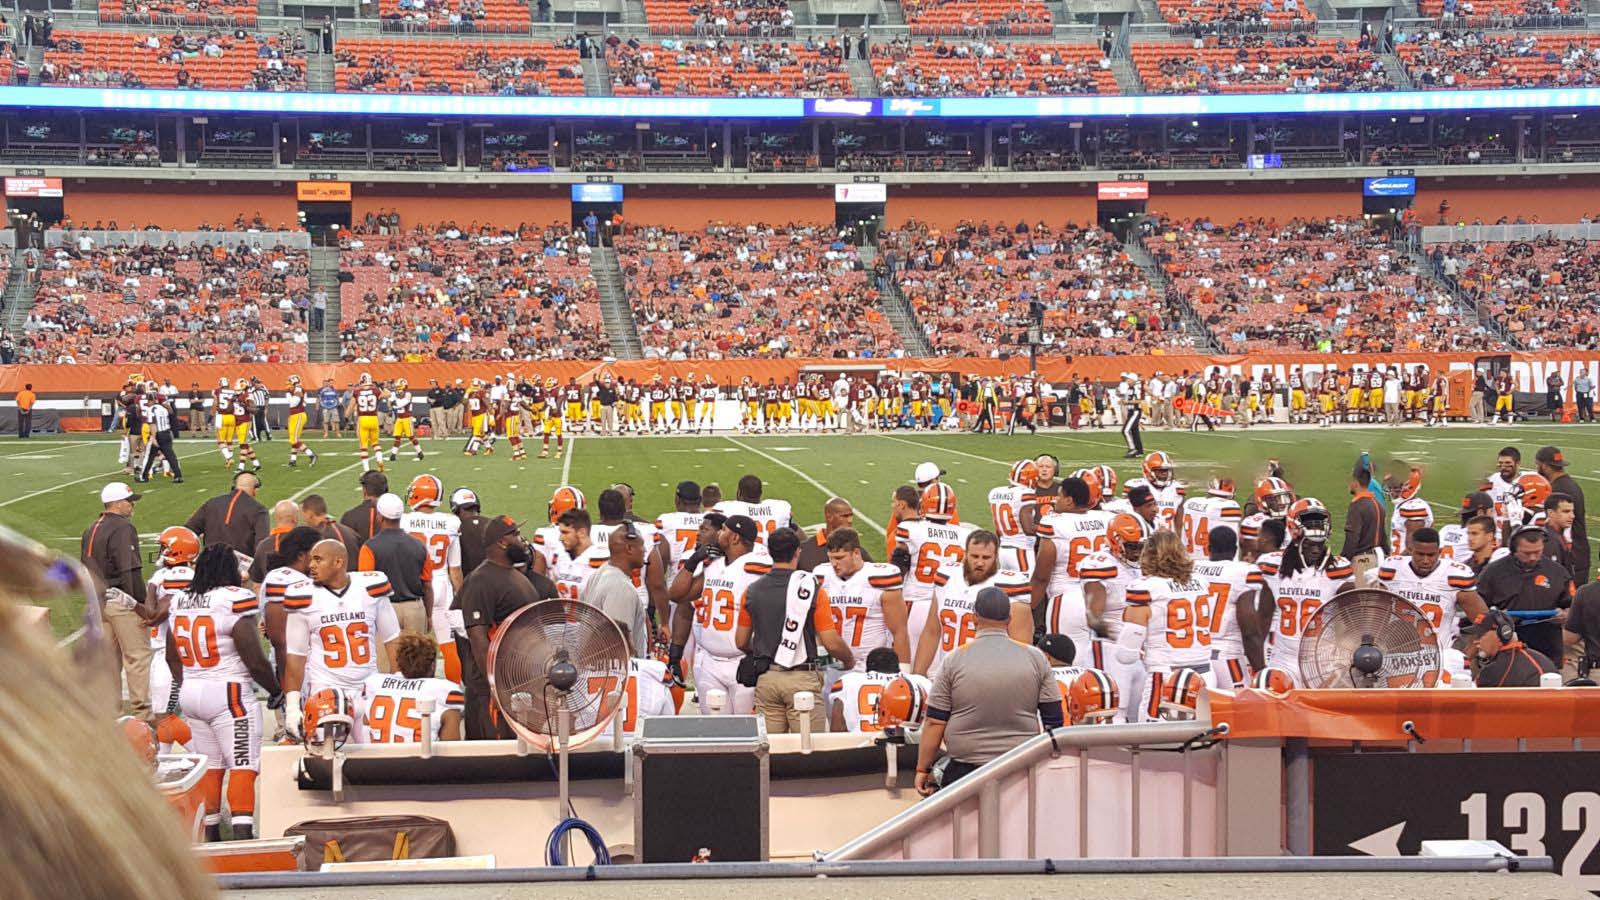 section 132, row 4 seat view  - cleveland browns stadium